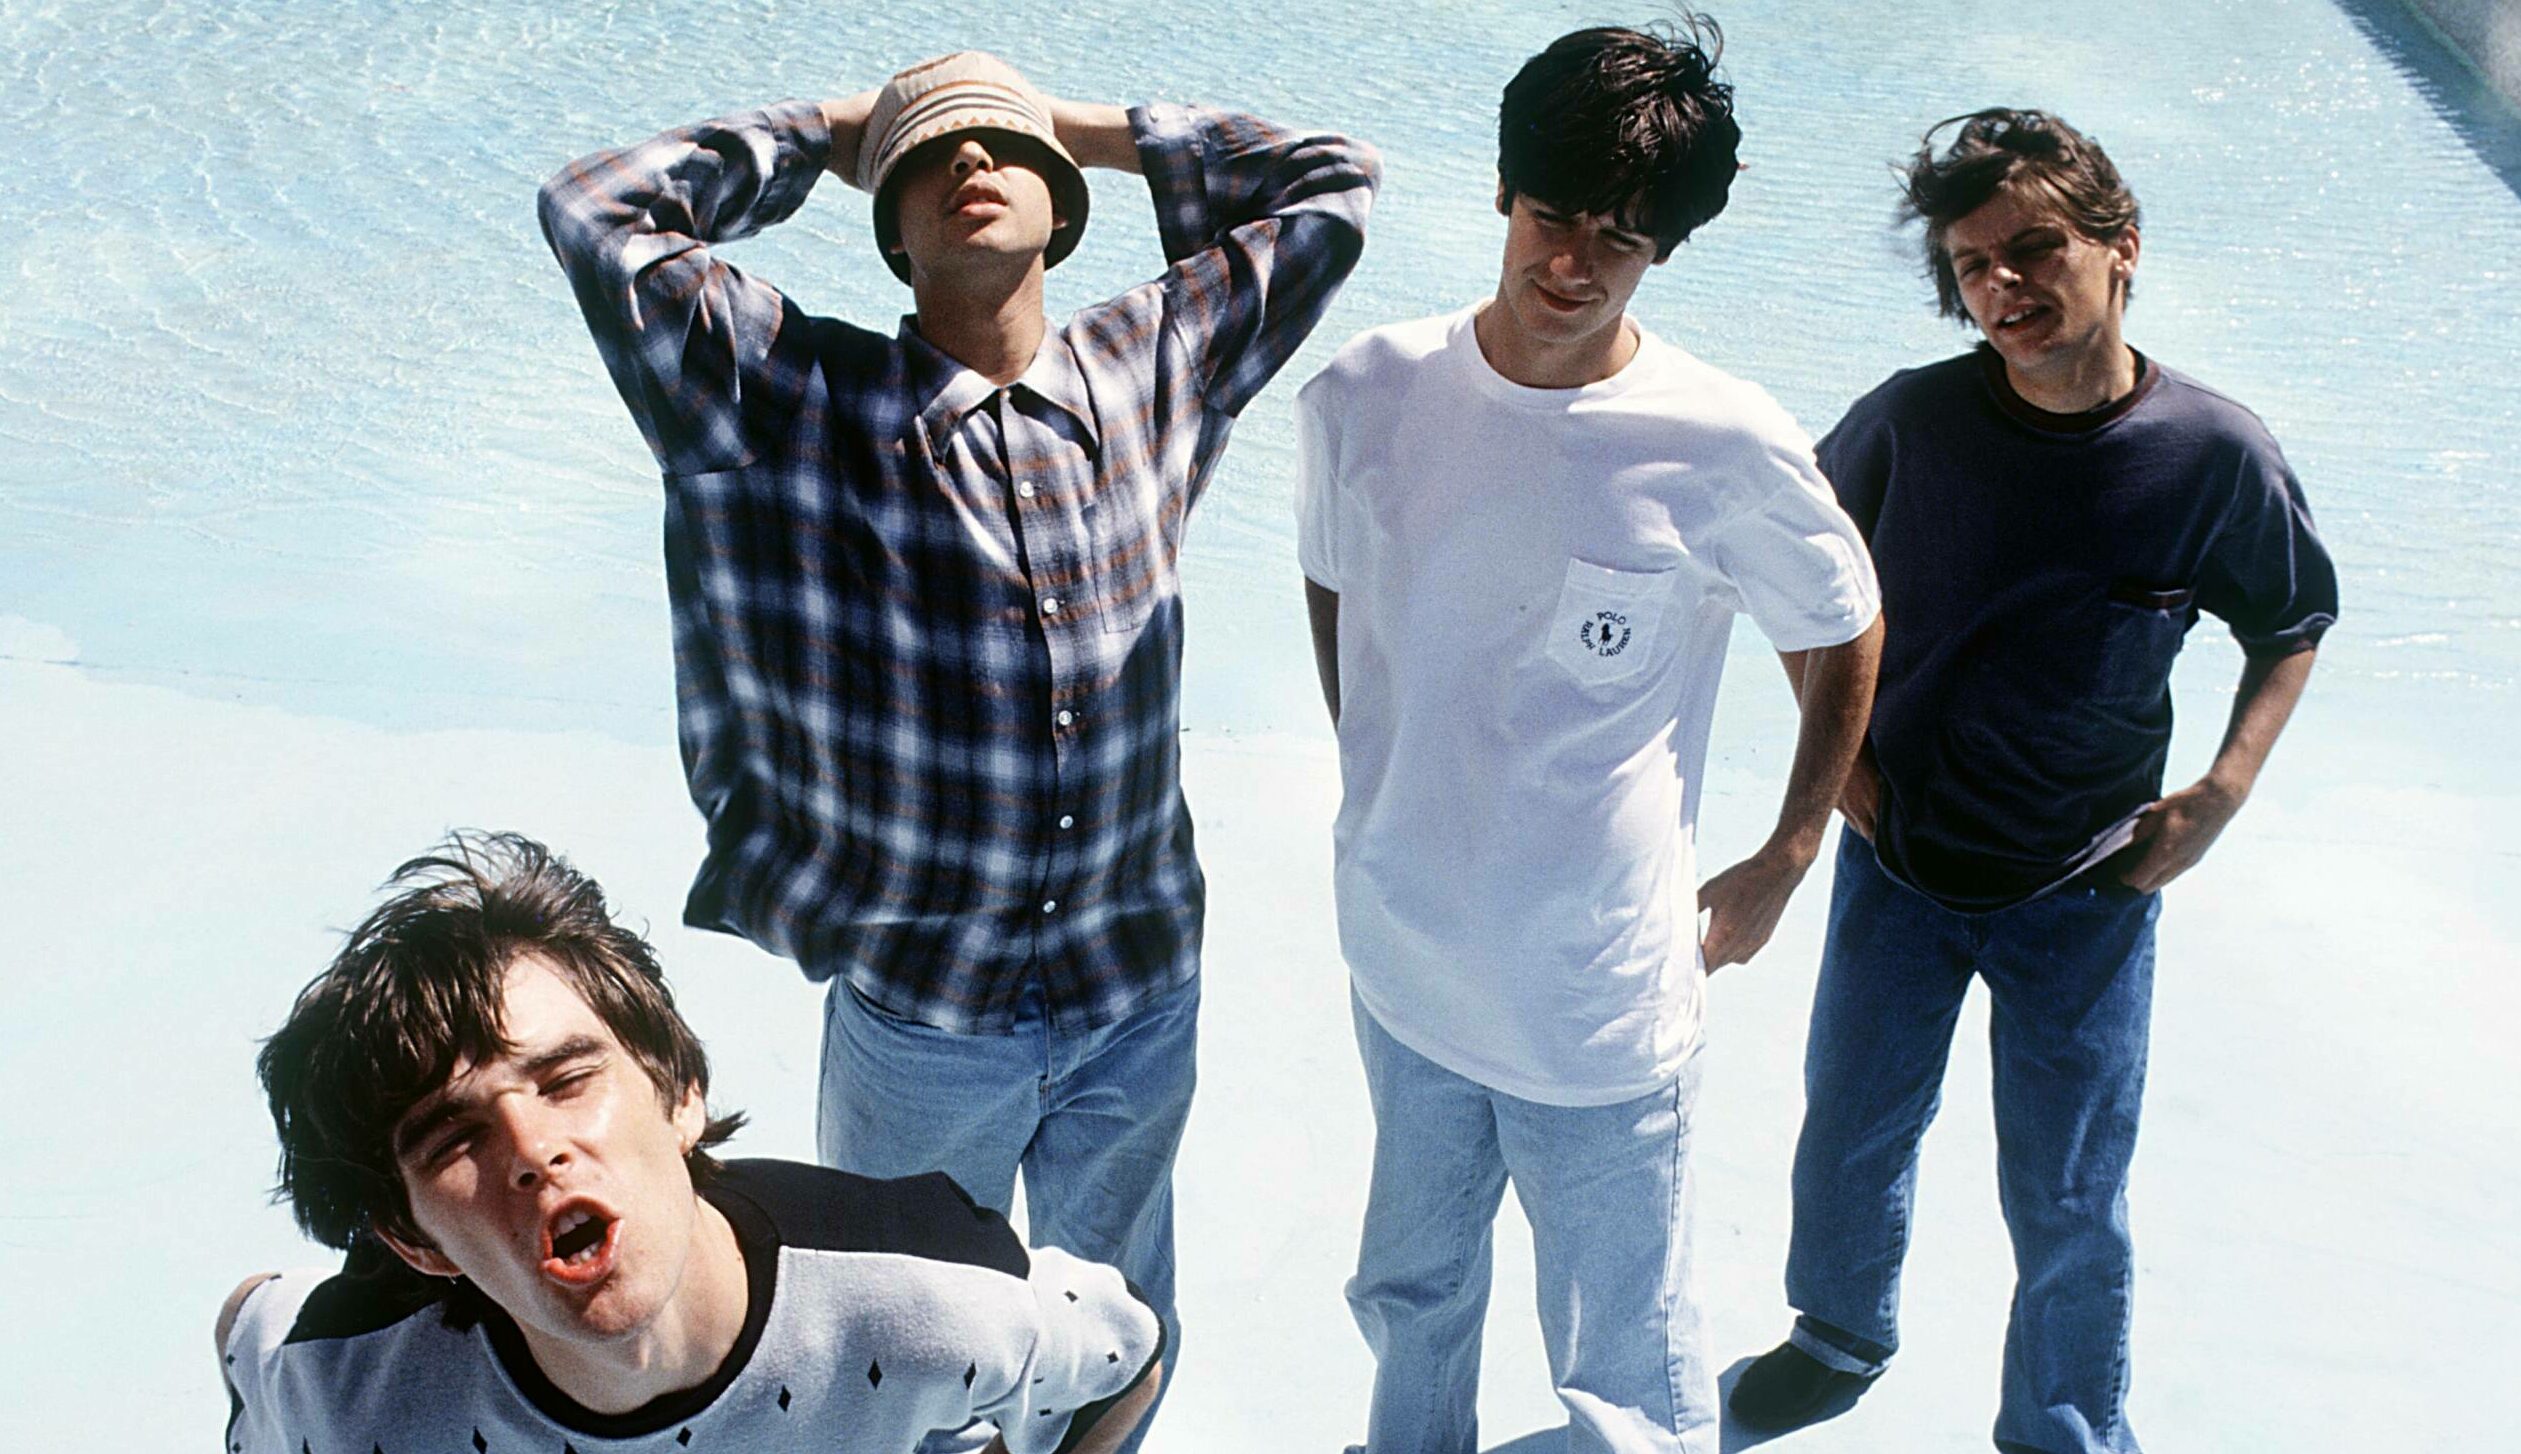 The Stone Roses 1989